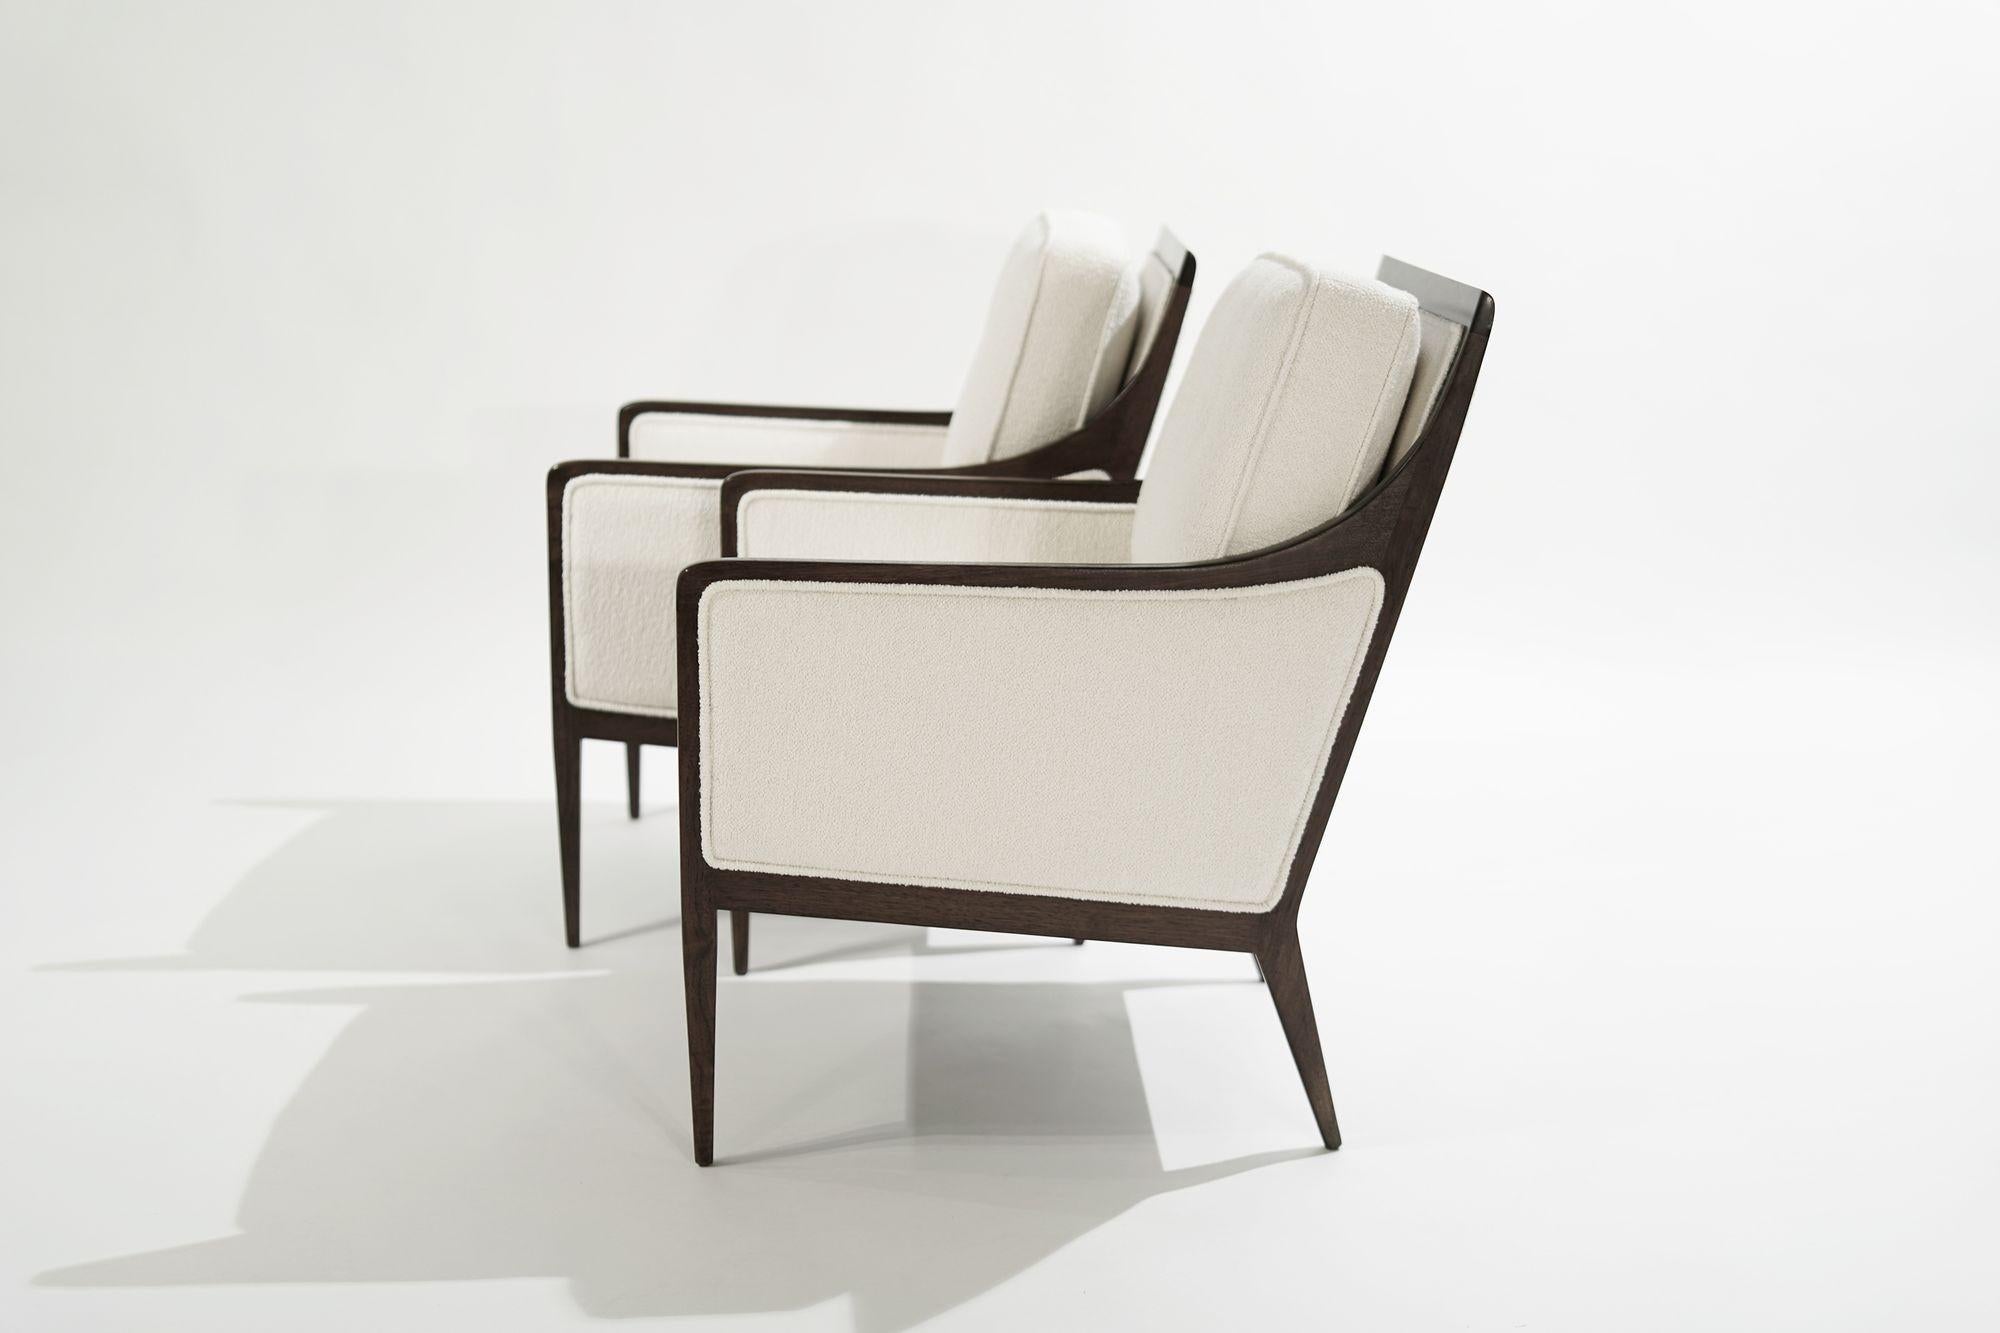 Bouclé Set of Lounge Chairs by Milo Baughman, Country Village Collection, C. 1950s For Sale